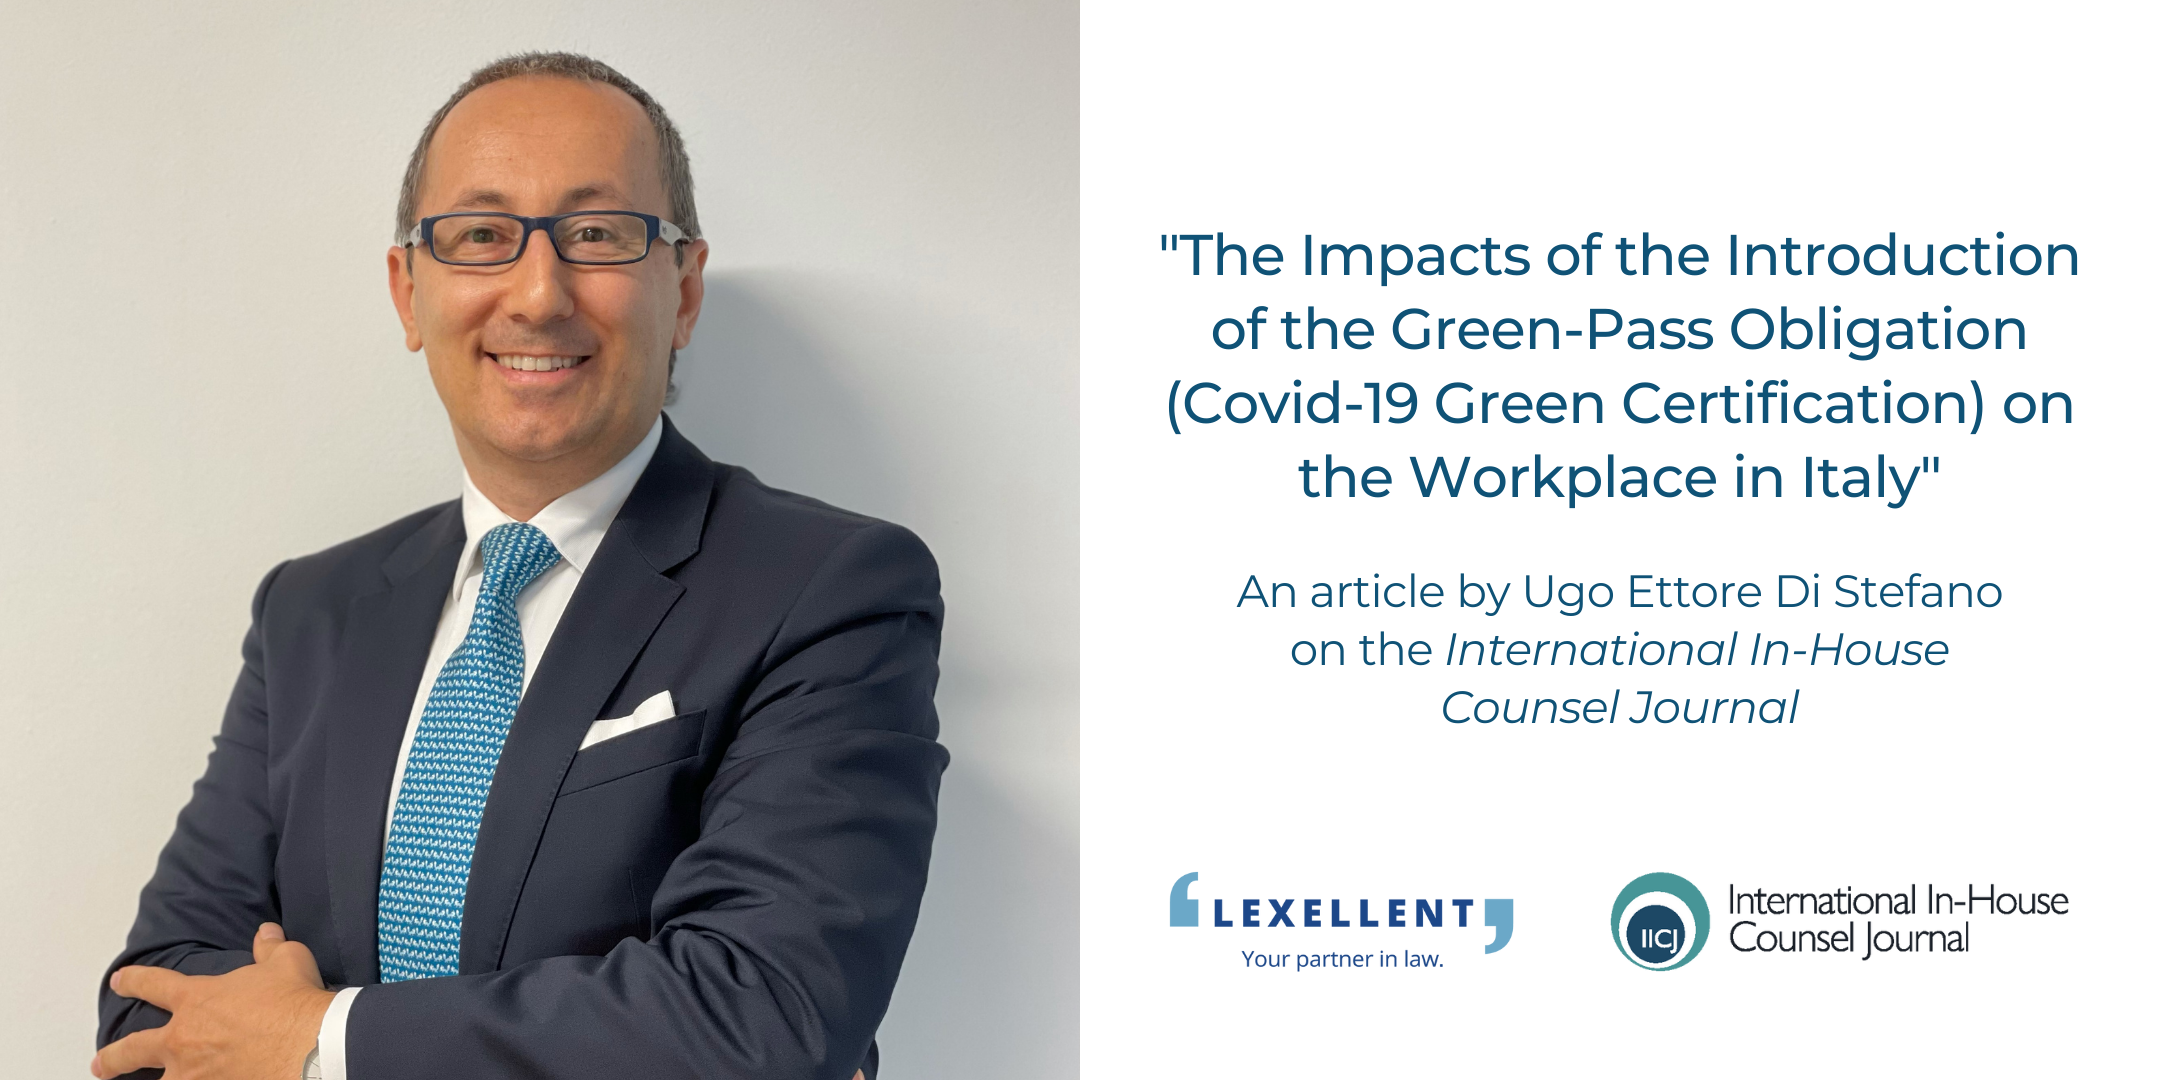 “The Impacts of the Introduction of the Green-Pass Obligation on the Workplace in Italy”, an article by Ugo Ettore Di Stefano on the International In-House Counsel Journal